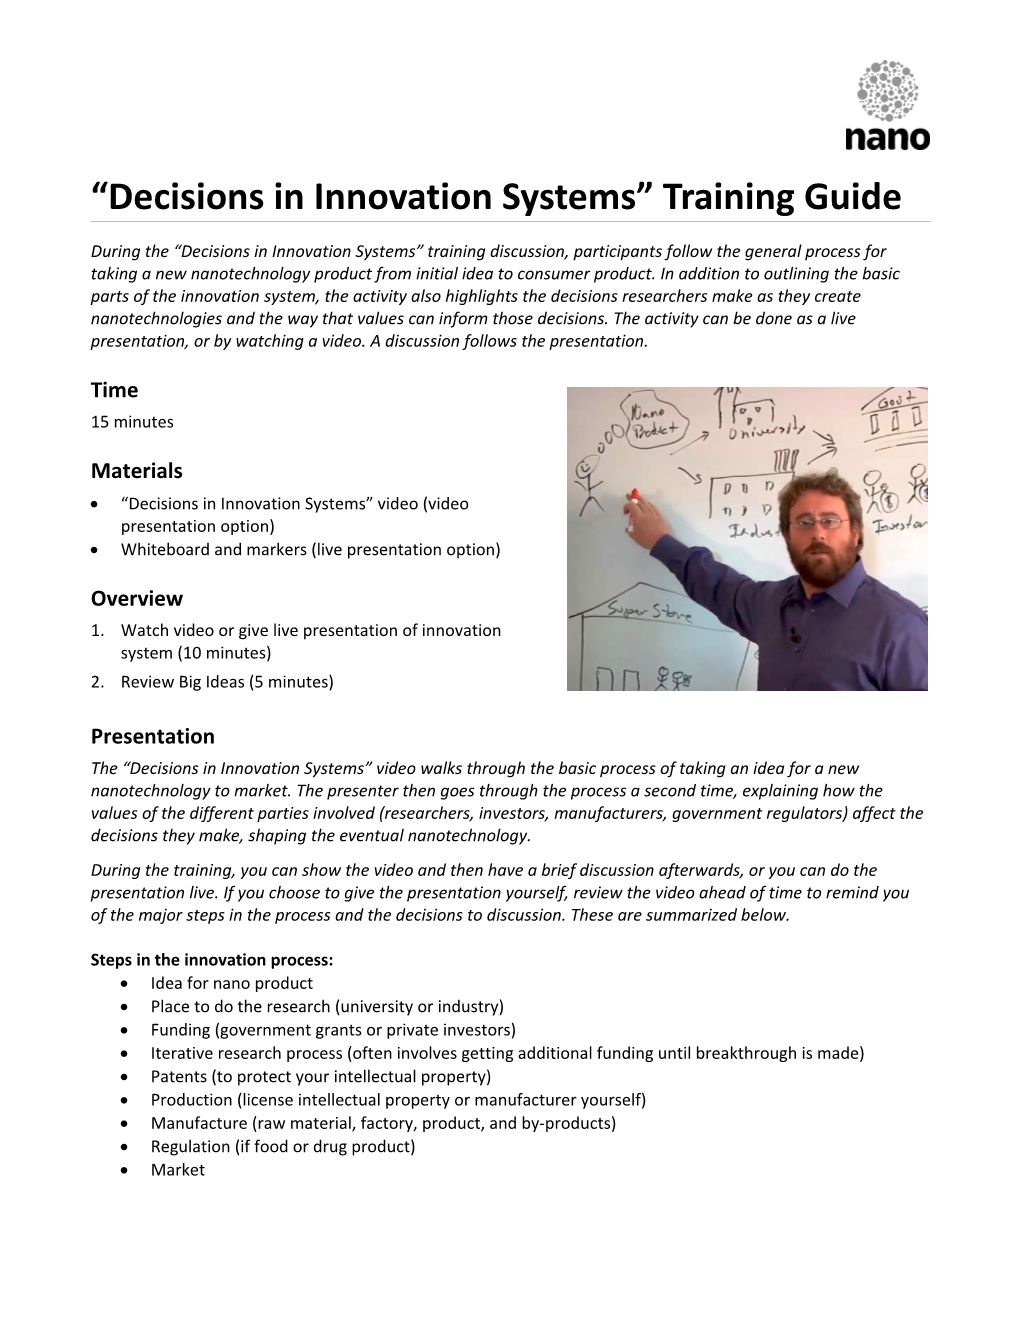 Decisions in Innovation Systems Training Guide